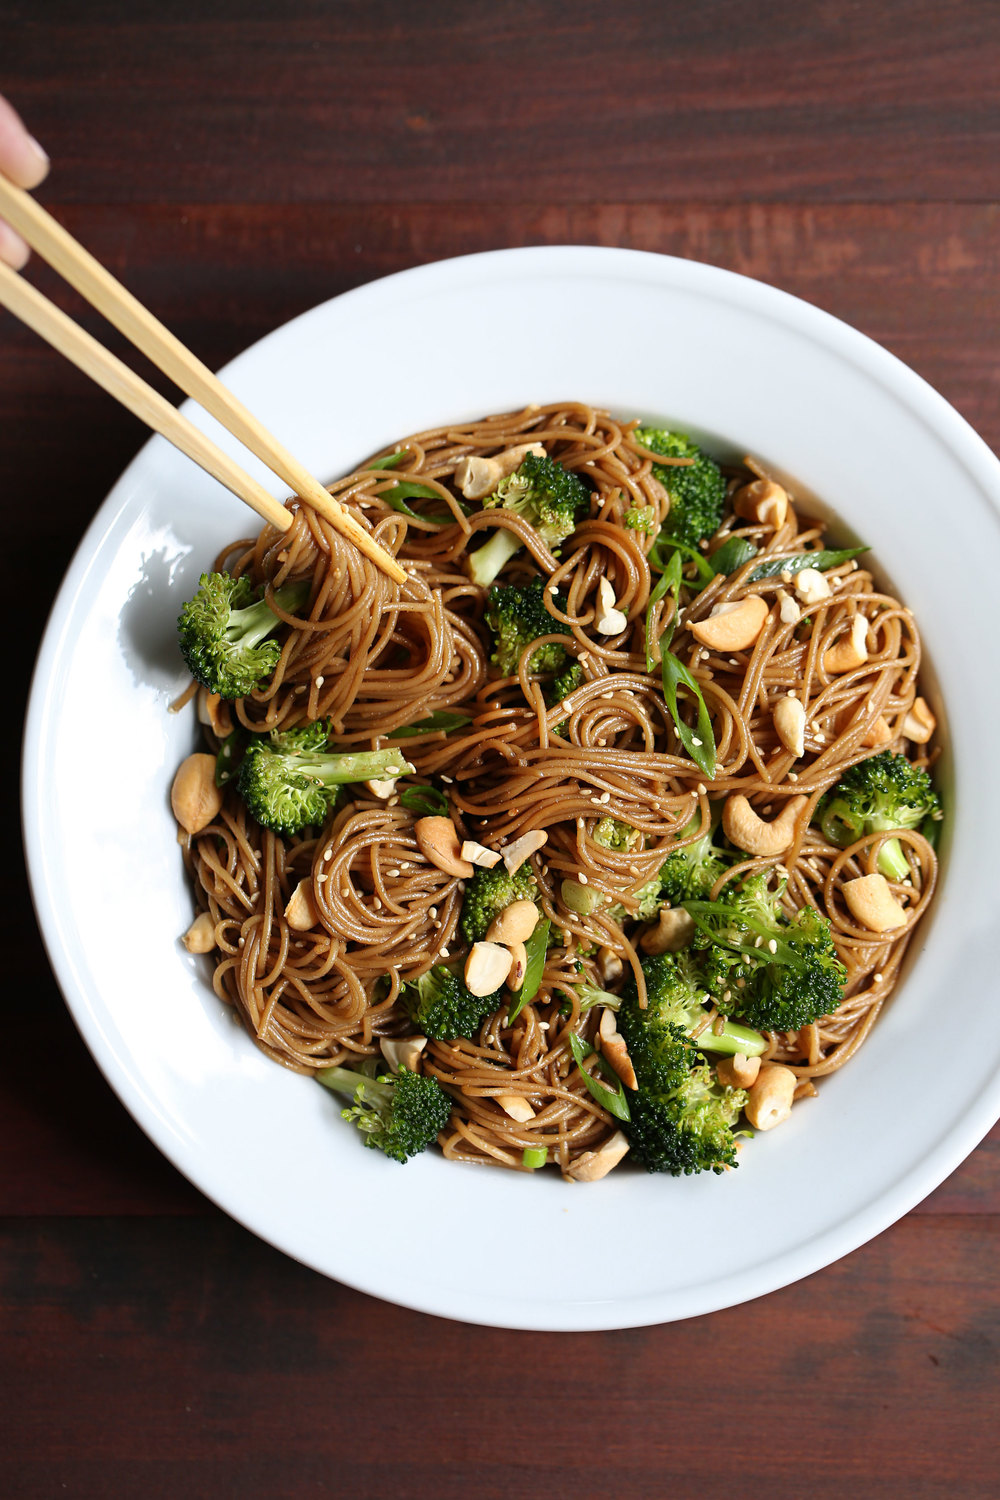 cold Chinese noodles with broccoli florets cashews and spaghetti noodles in soy based sauce